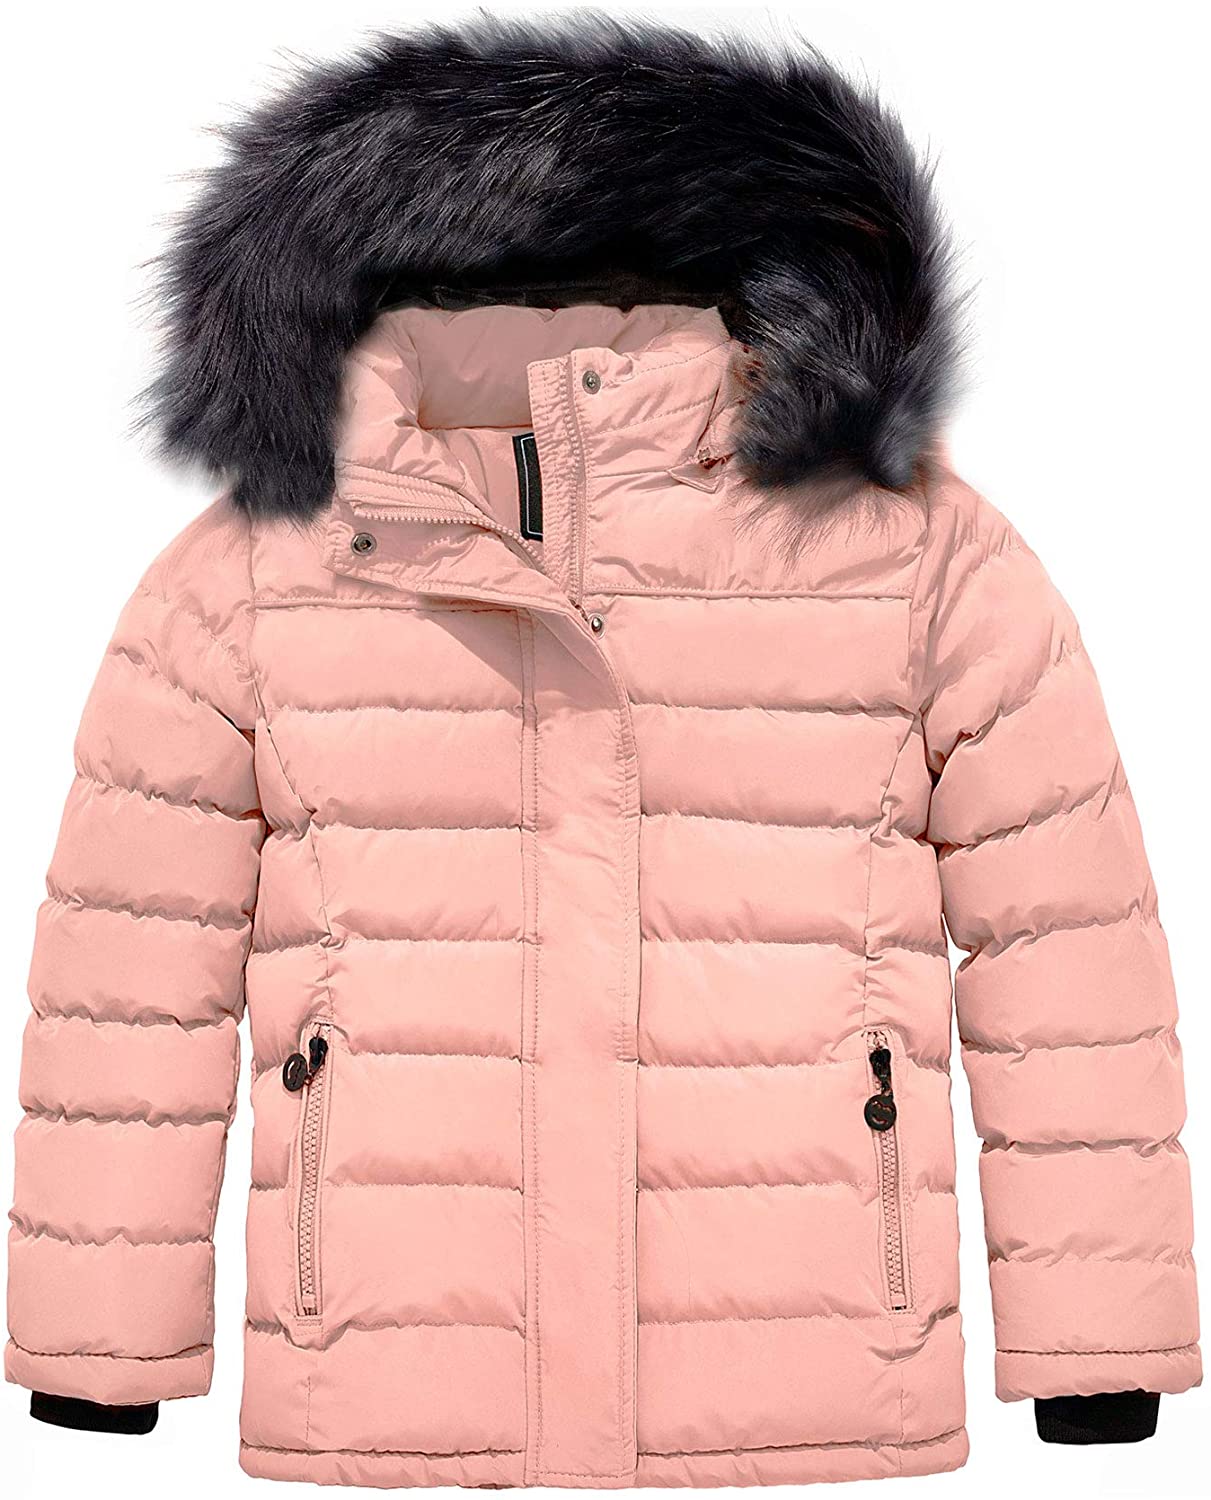 Girls' Water Resistant Winter Coat Soft Fleece Lined Cotton Padded Puffer  Jacket - China Winter Jacket and Sport Jacket price